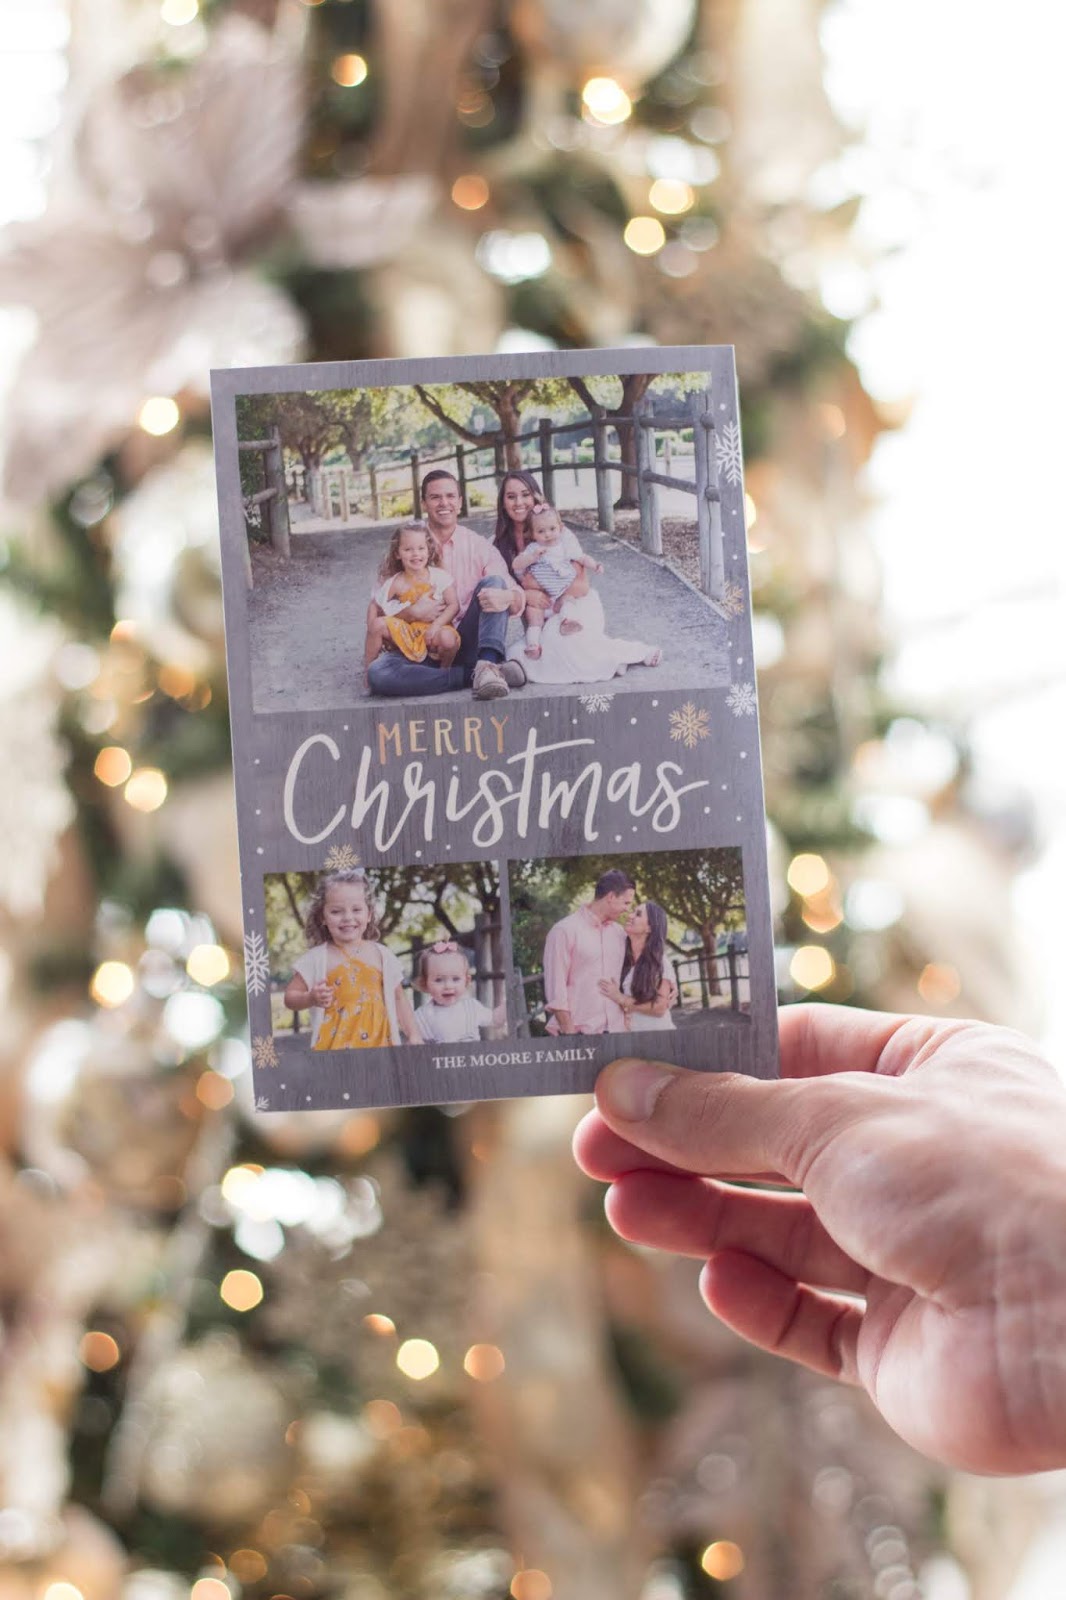 My Family Christmas Cards Throughout The Years + More Holiday